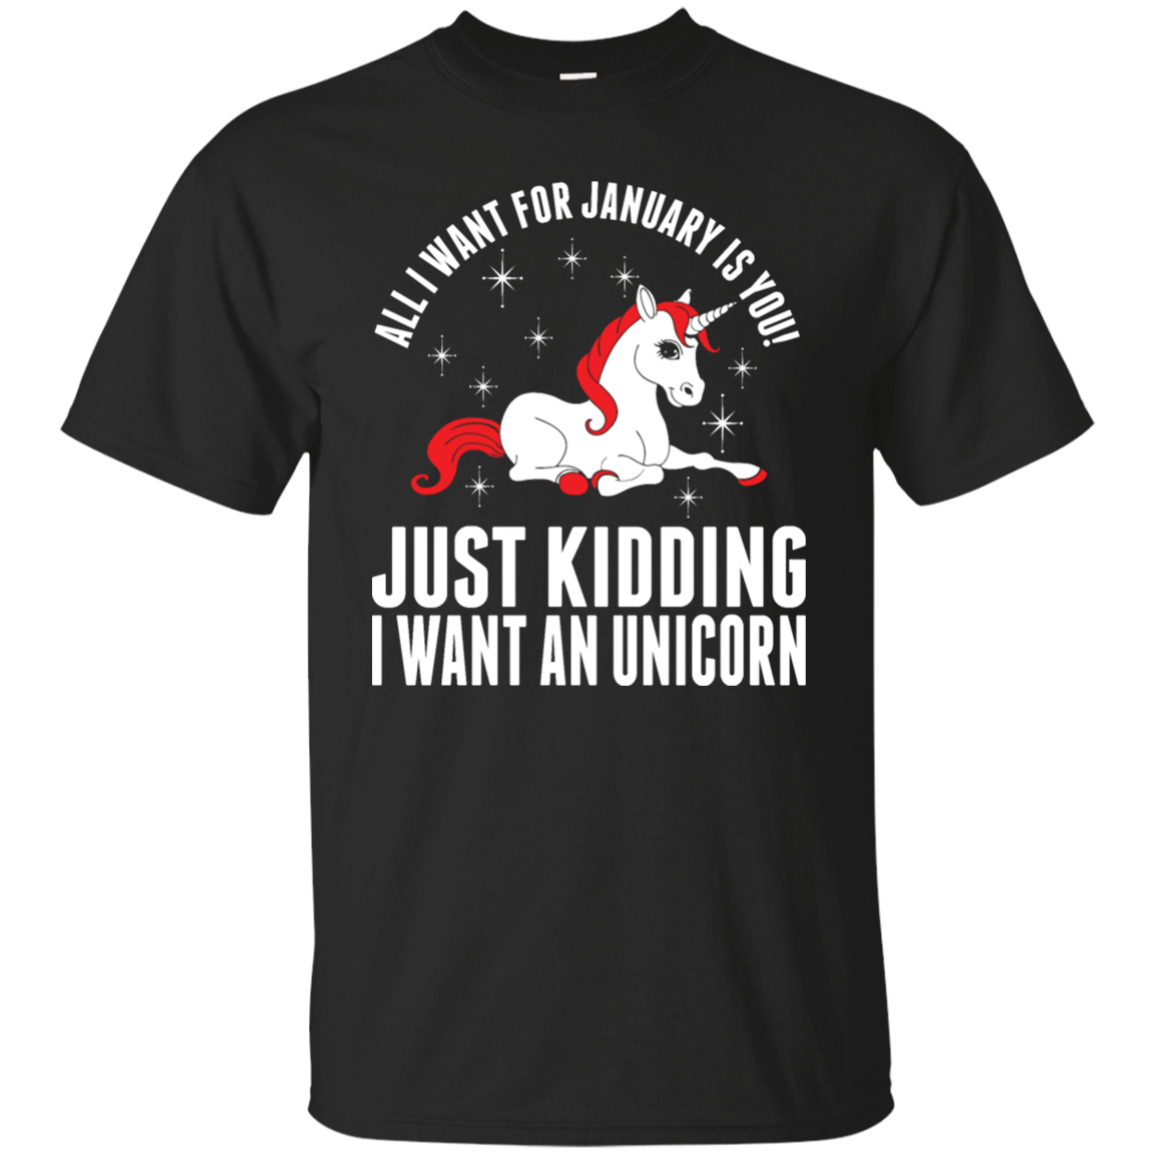 All I Want For January Is You - Just Kidding I Want An Unicorn Shirt, Hoodie, Tank